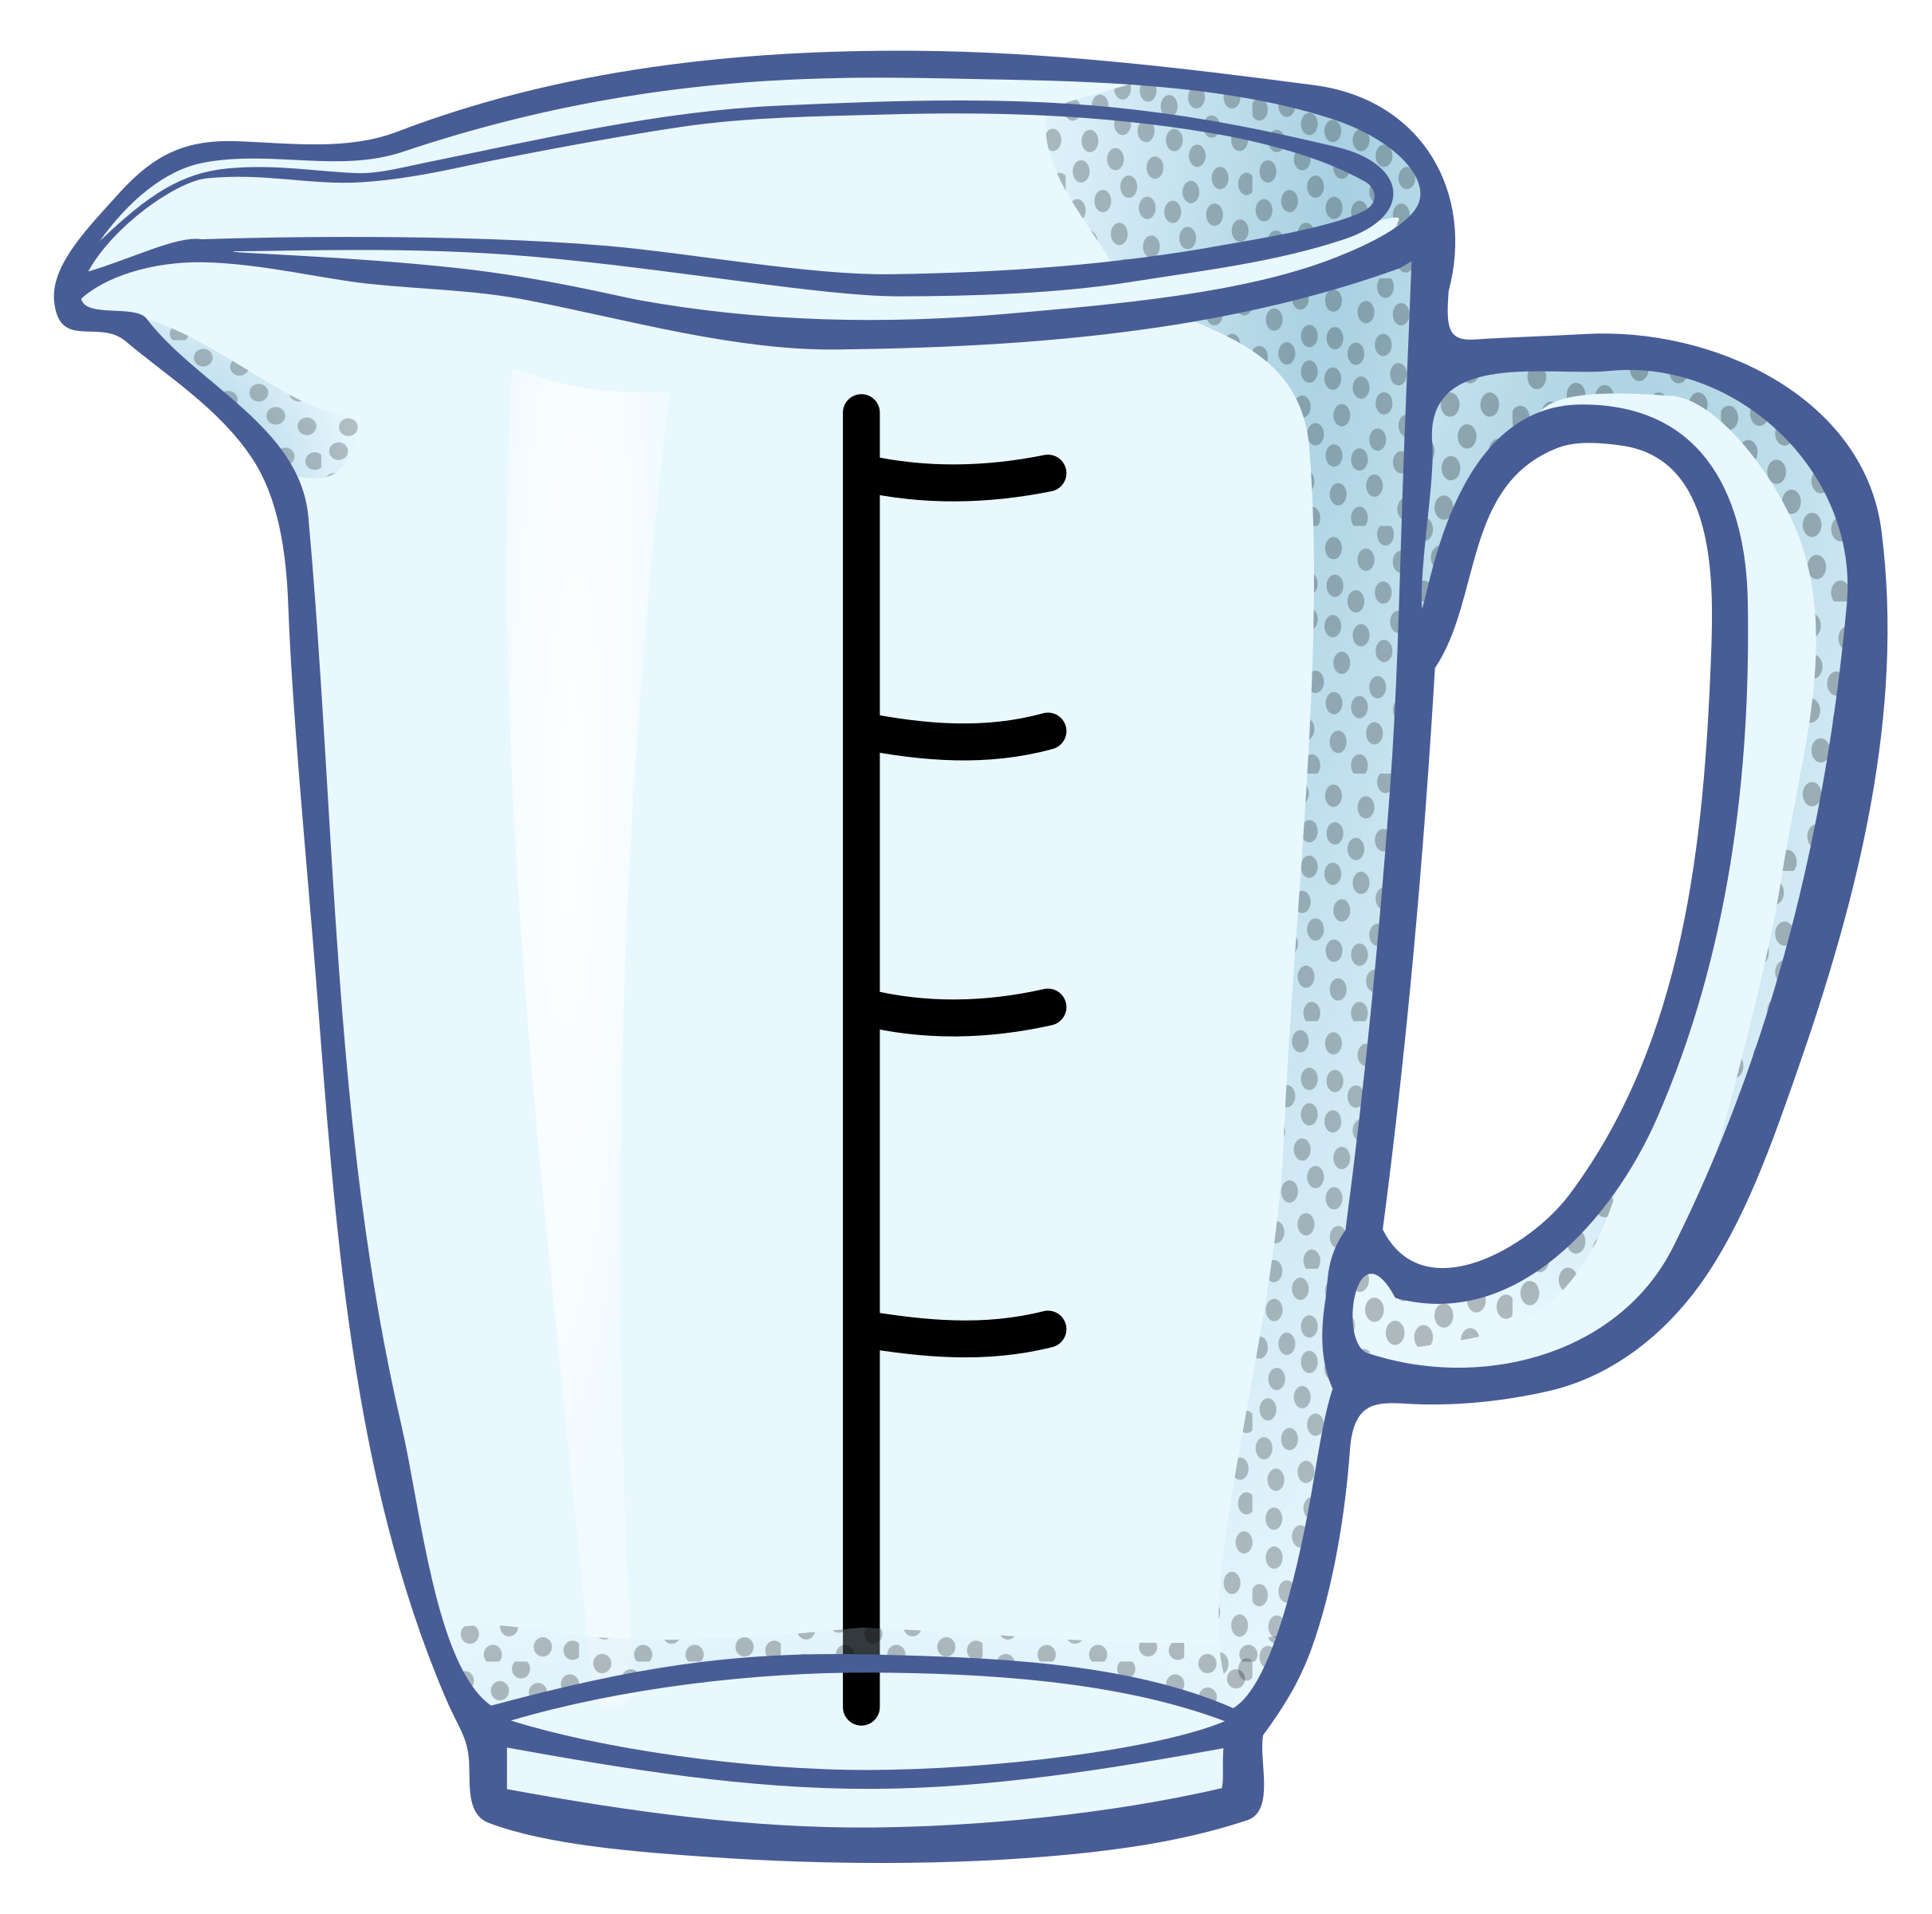 cups clipart measuring